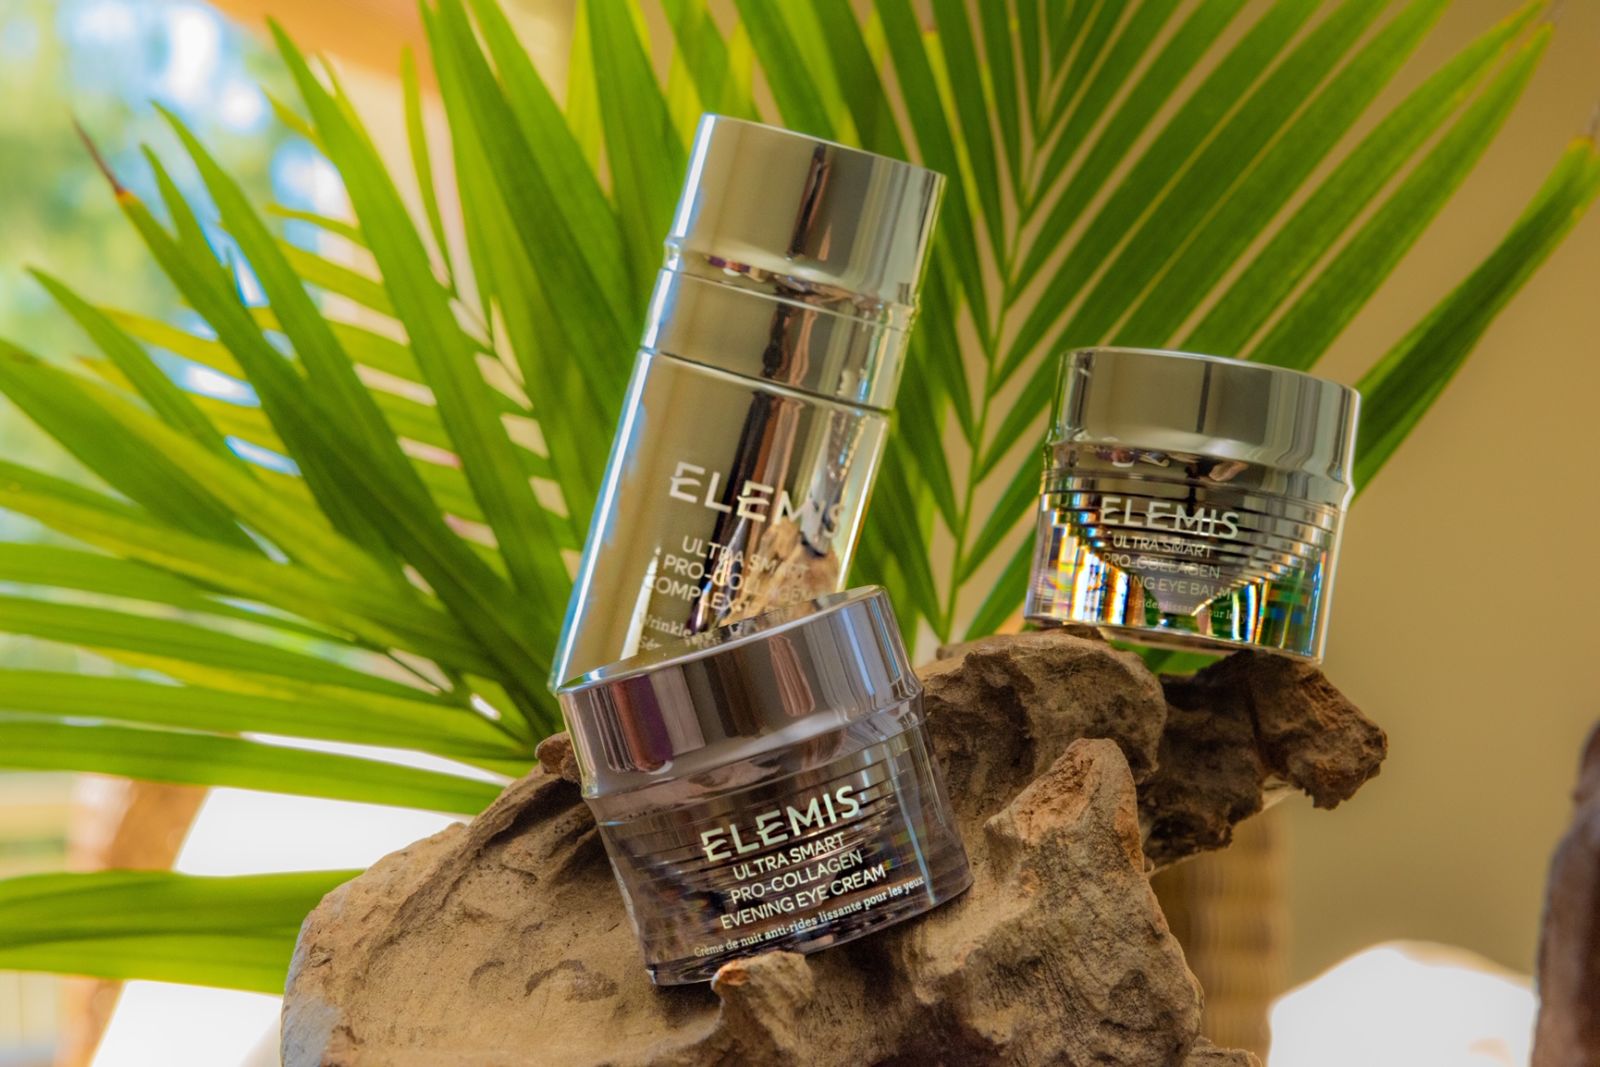 ELEMIS: Ultra Smart Pro-Collagen, Anti-Aging Products That Work